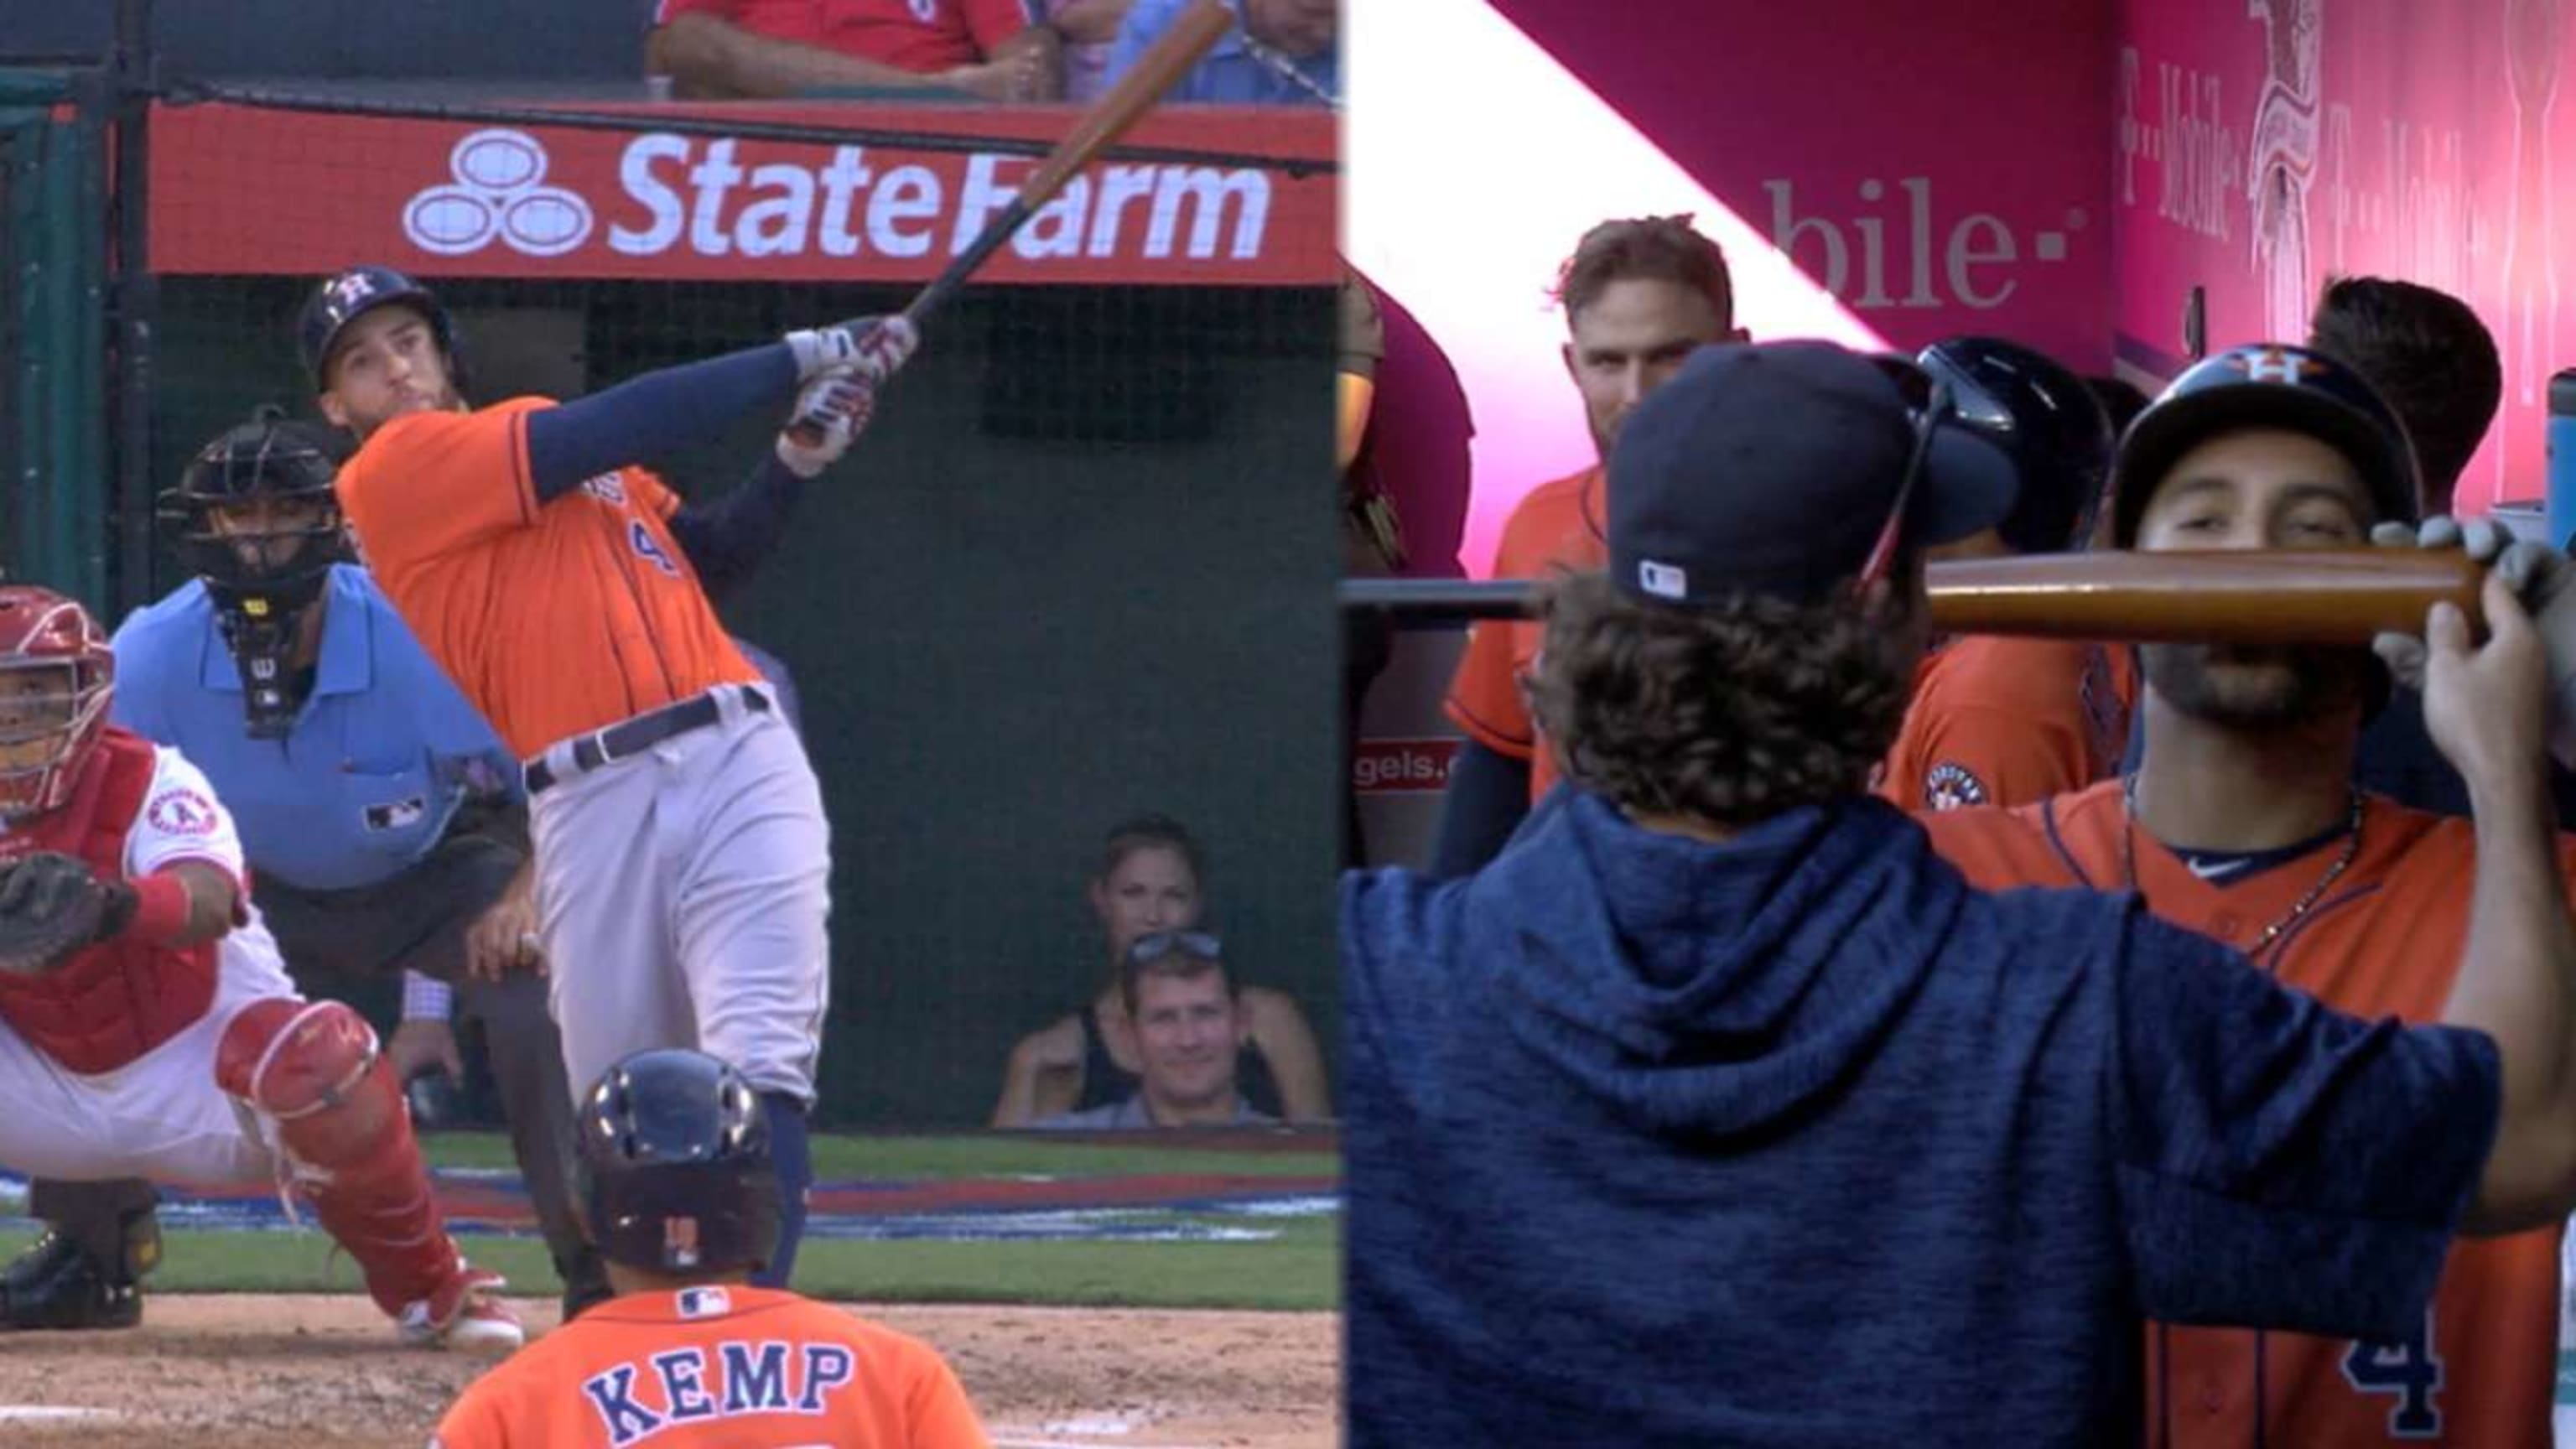 With Gerrit Cole's help, George Springer gave his bat a kiss after